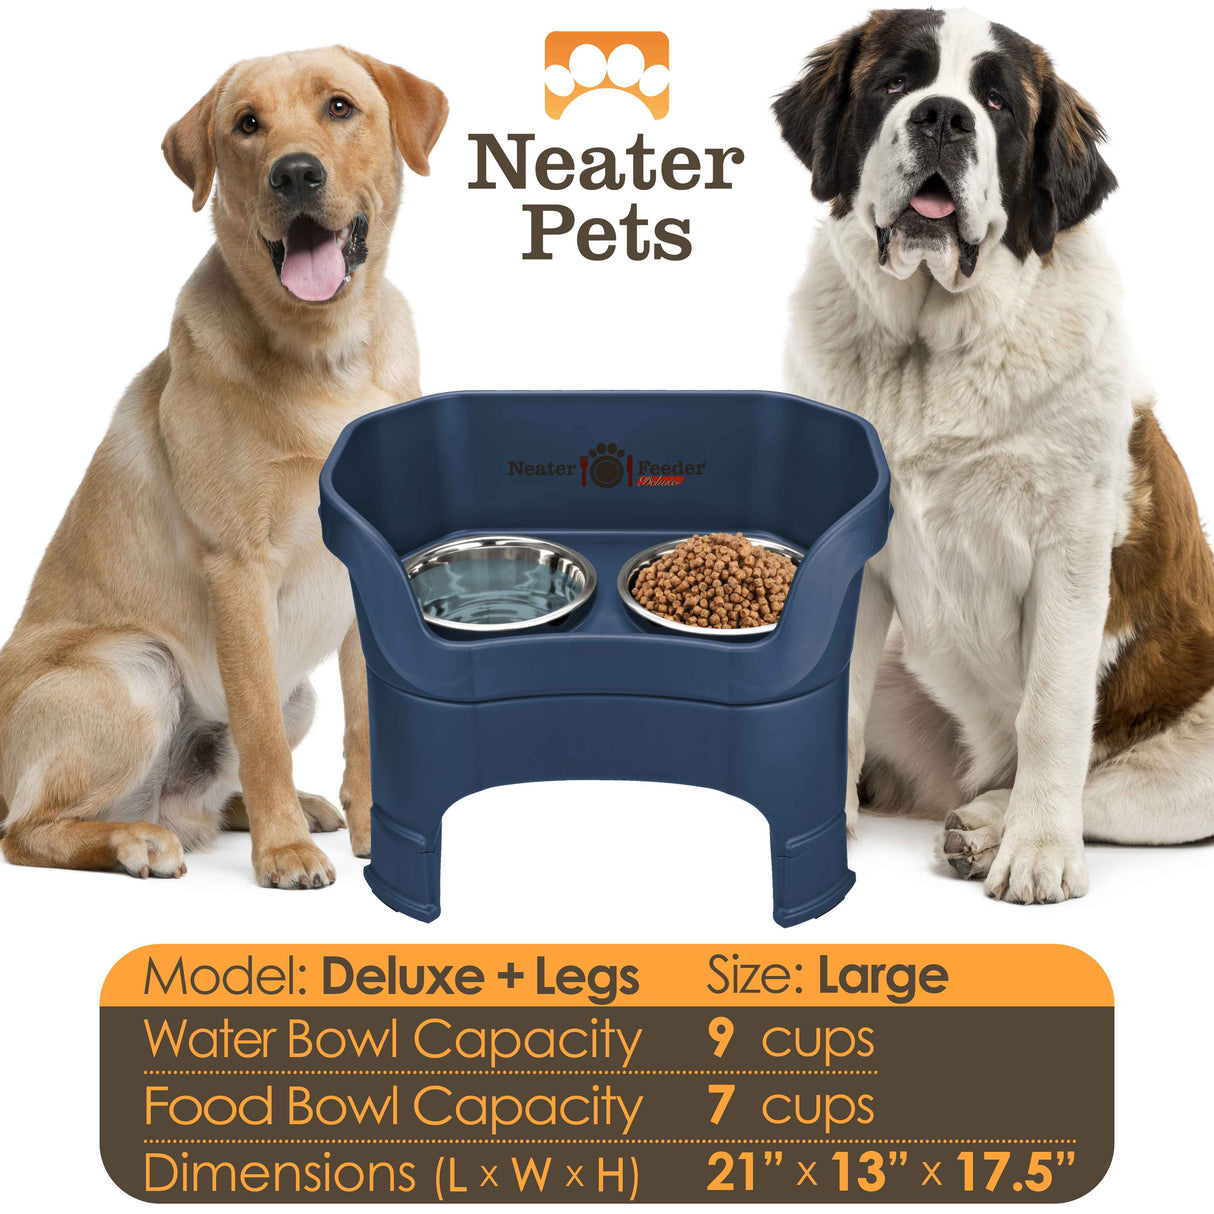 Dark Blue Large Dog with leg extensions bowl capacity